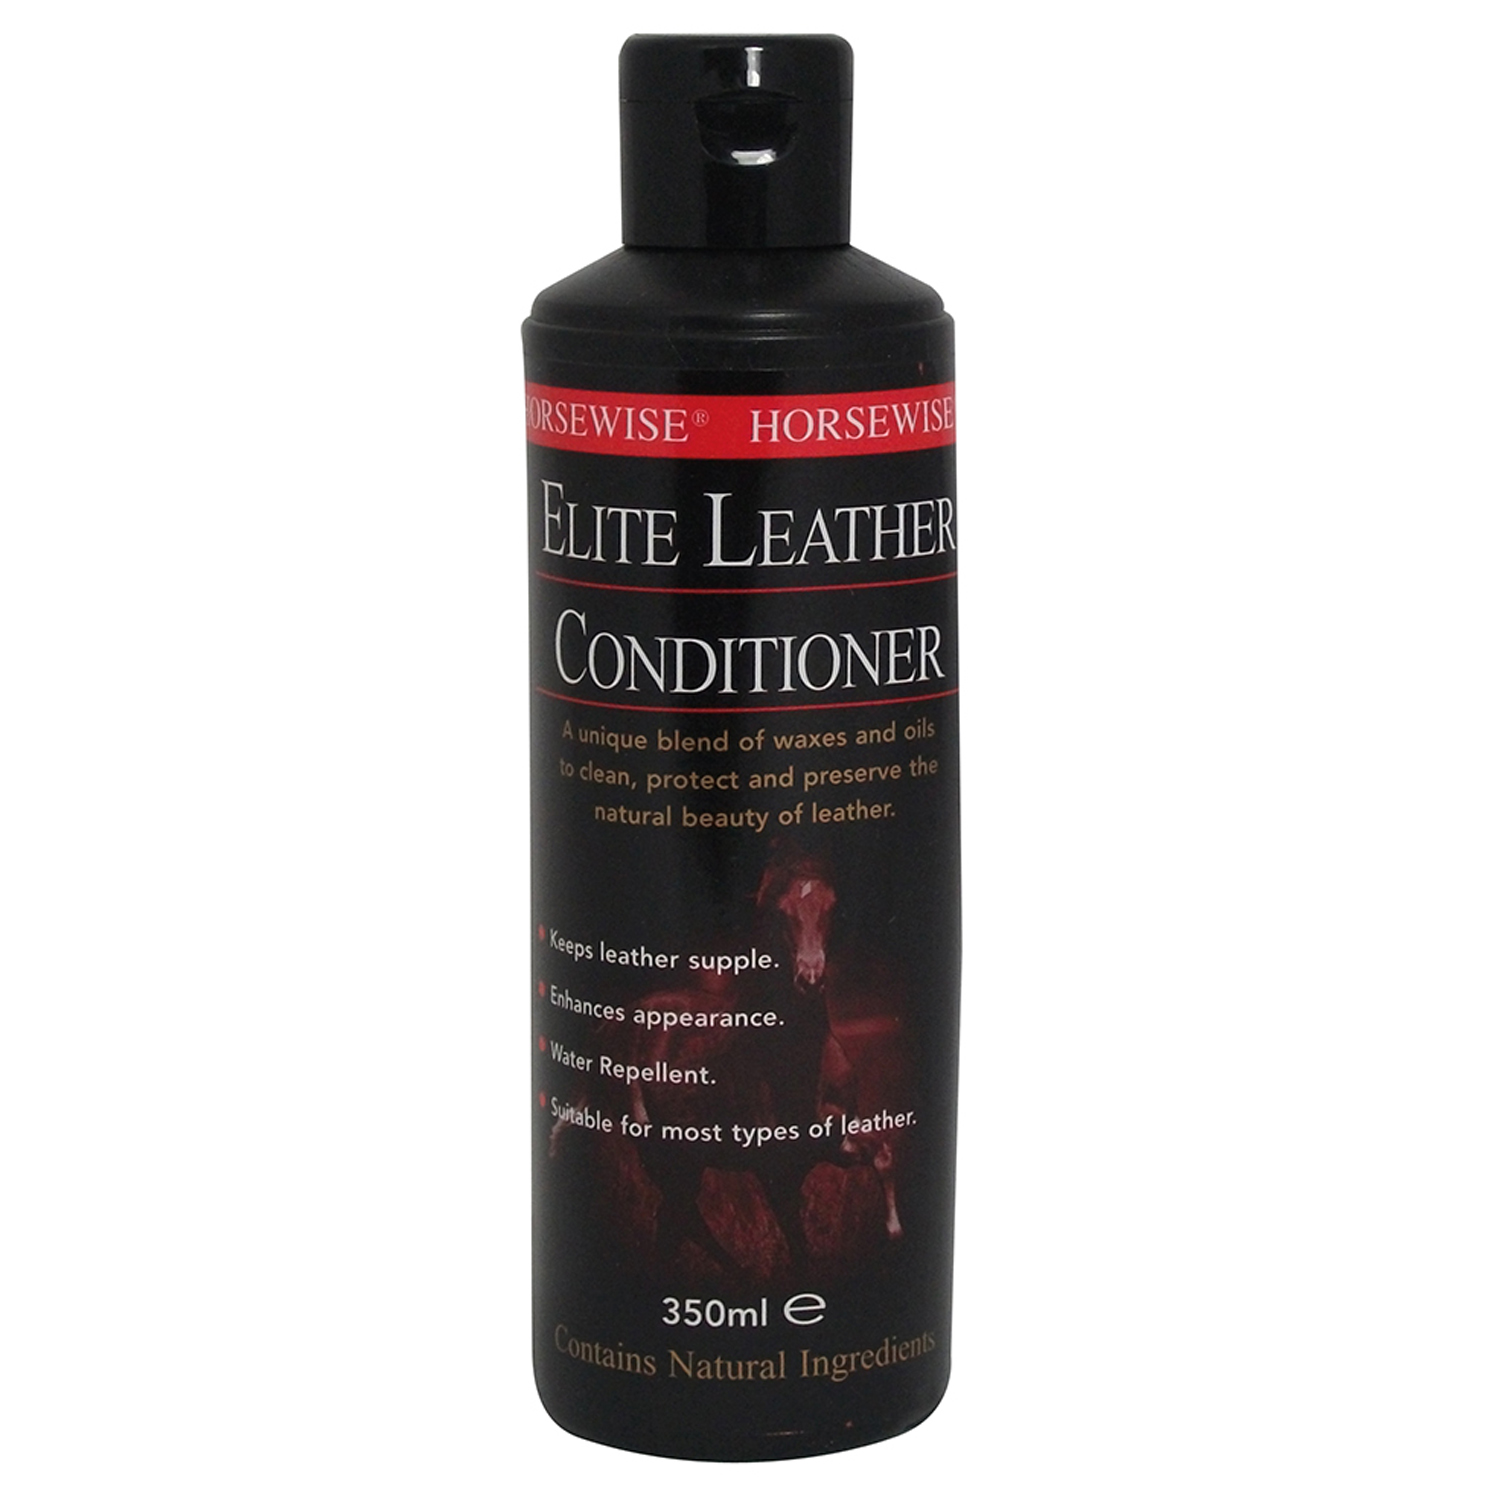 HORSEWISE ELITE LEATHER CONDITIONER 350 ML 350 ML